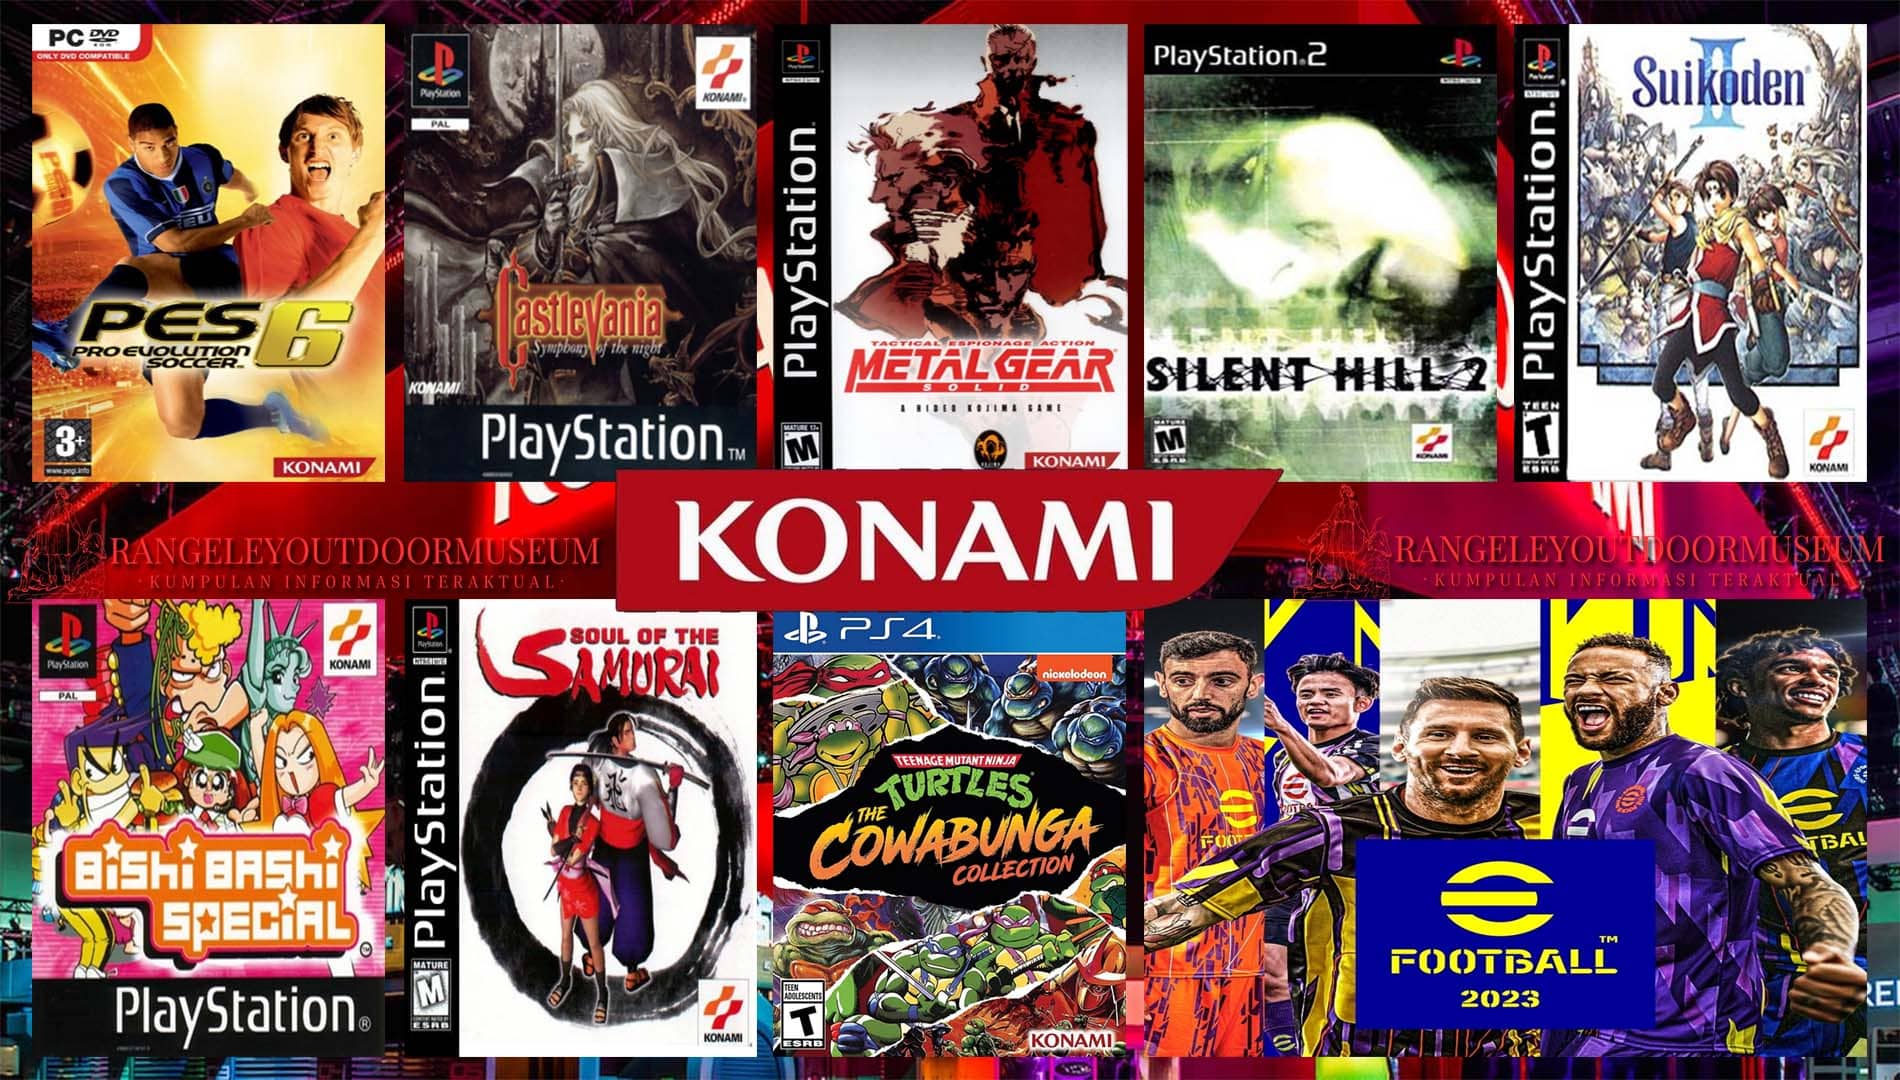 Konami: A Pioneering Game Developer Shaping the Industry